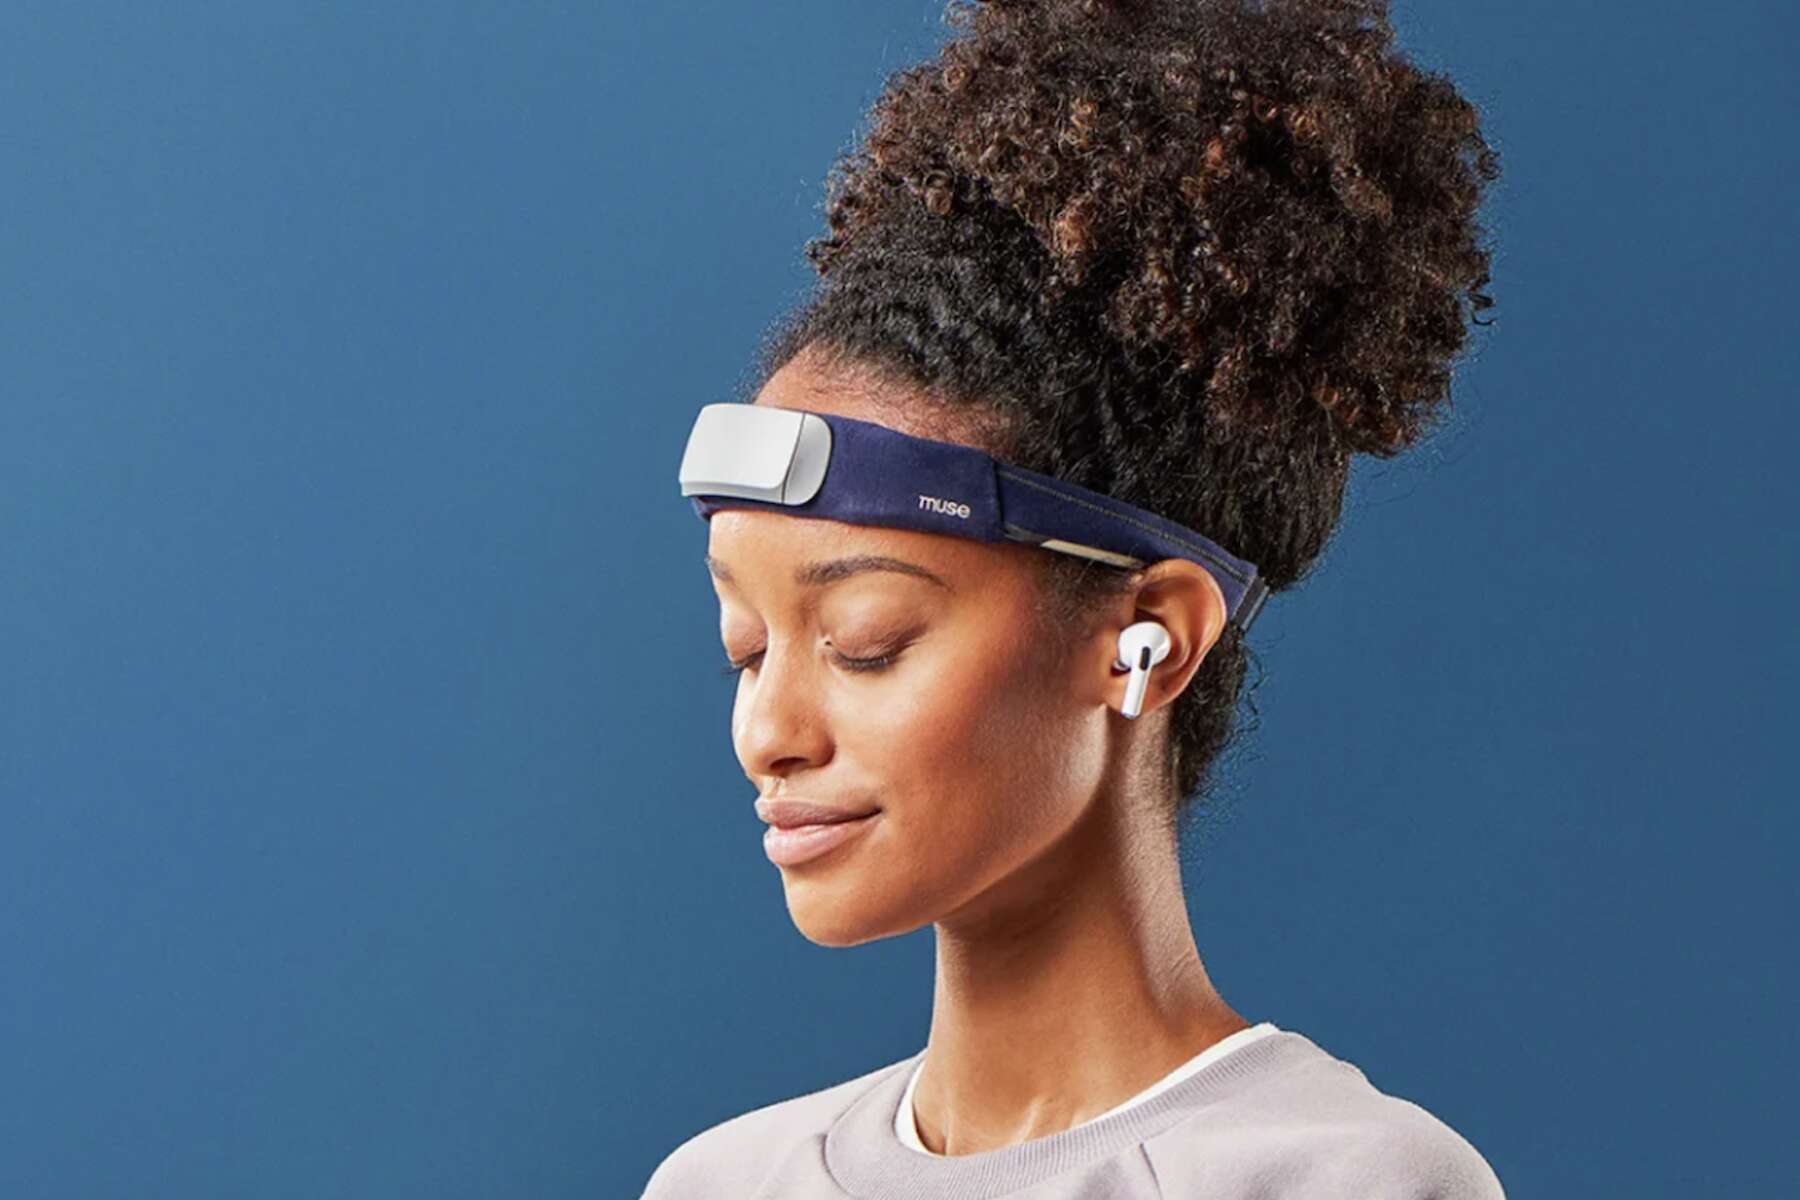 I tried Muse's brain sensing headband, and it's the coolest thing